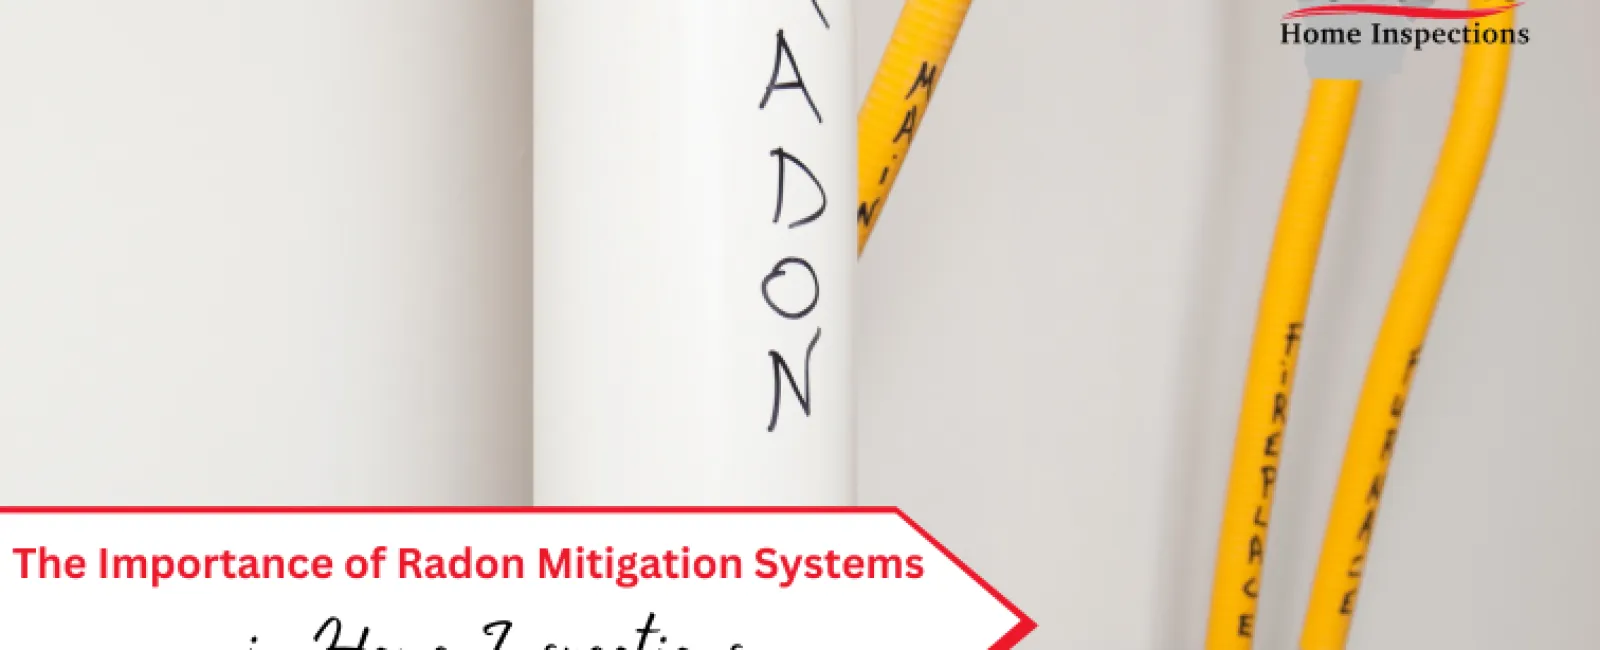 The Importance of Radon Mitigation Systems in Home Inspections